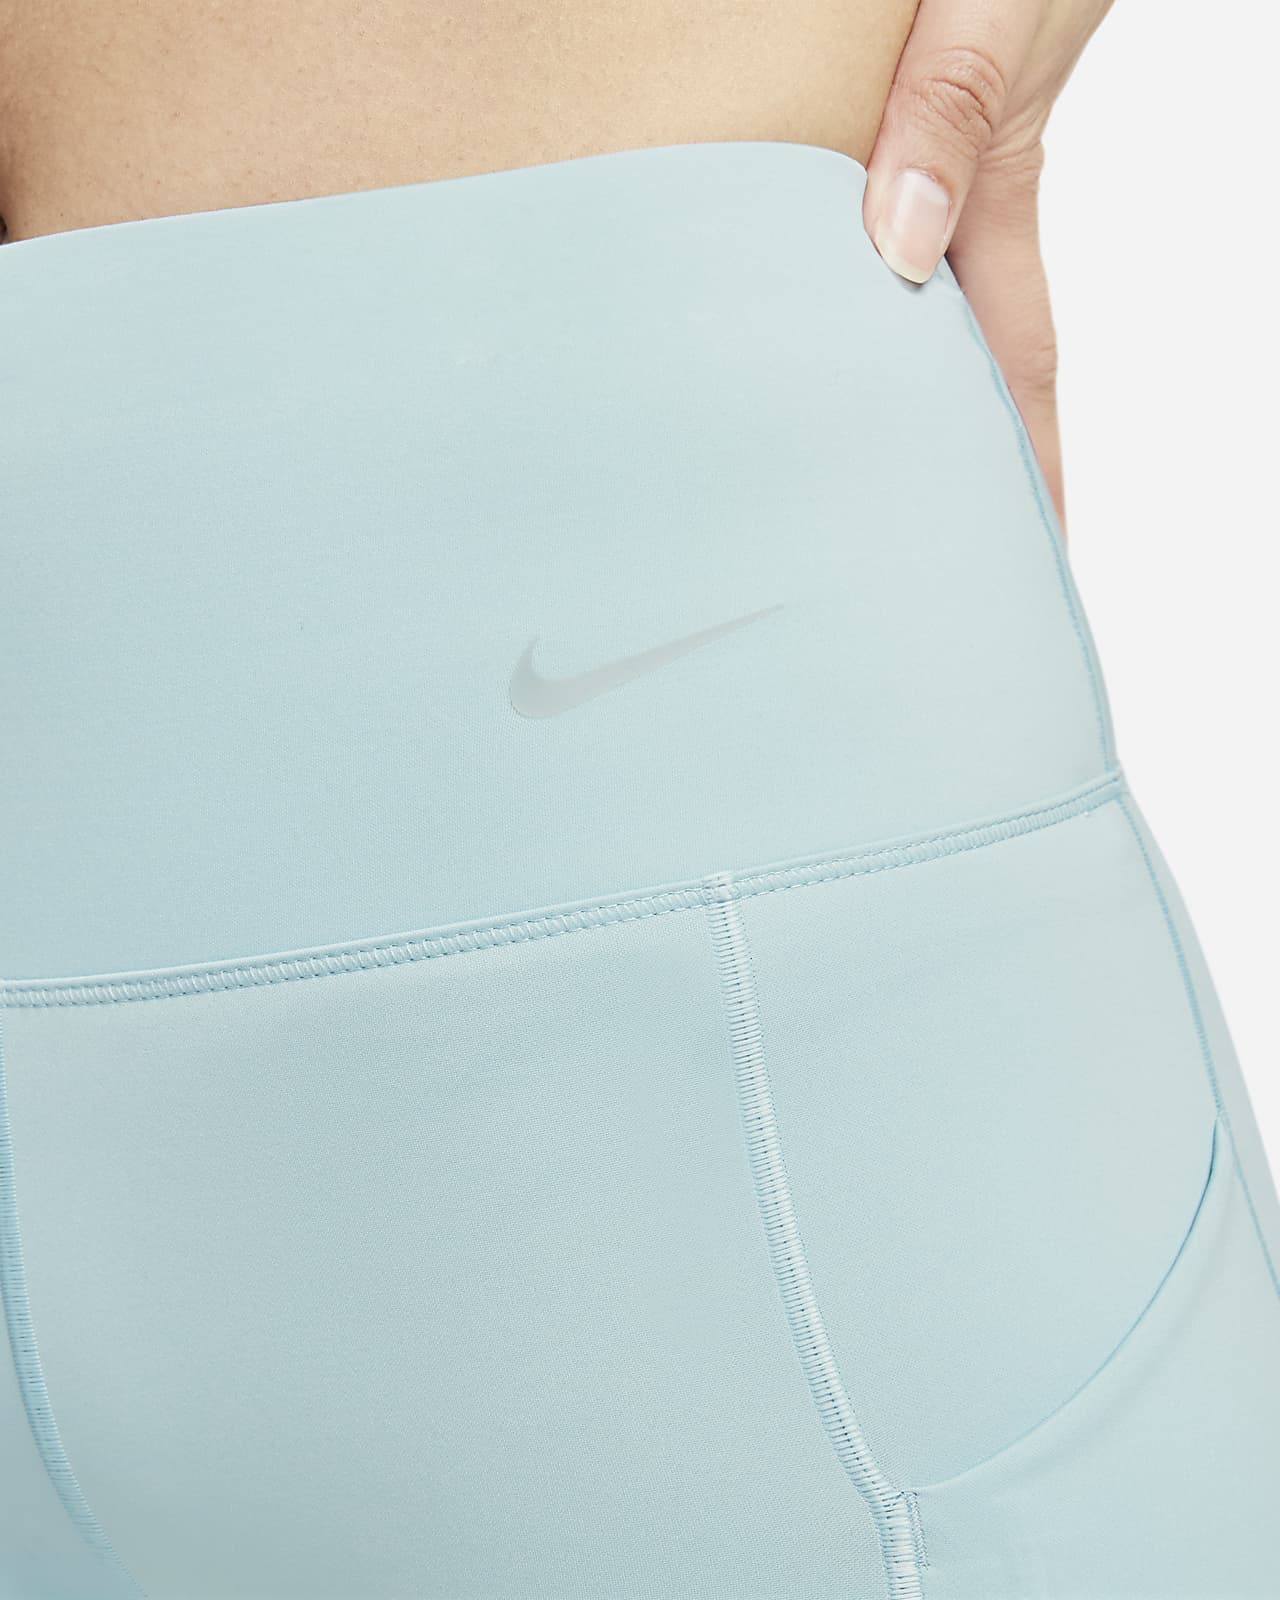 Nike Women's High Waist Legging With Zip Opening In Blue CU5385-458 SMALL  💯AUTH